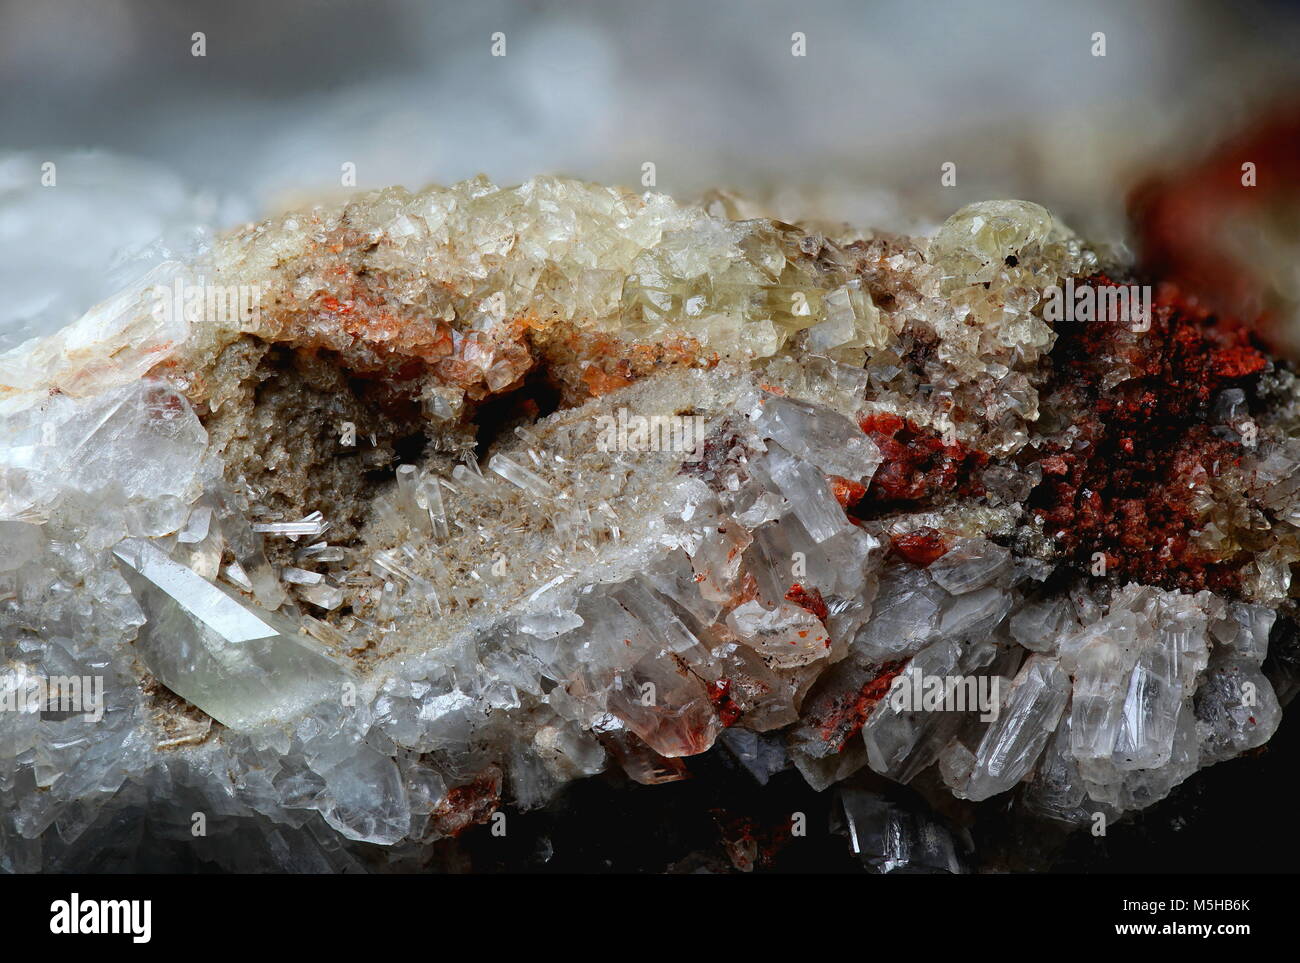 Sample of calcite crystals from Illo marble quarry, Finland. Stock Photo